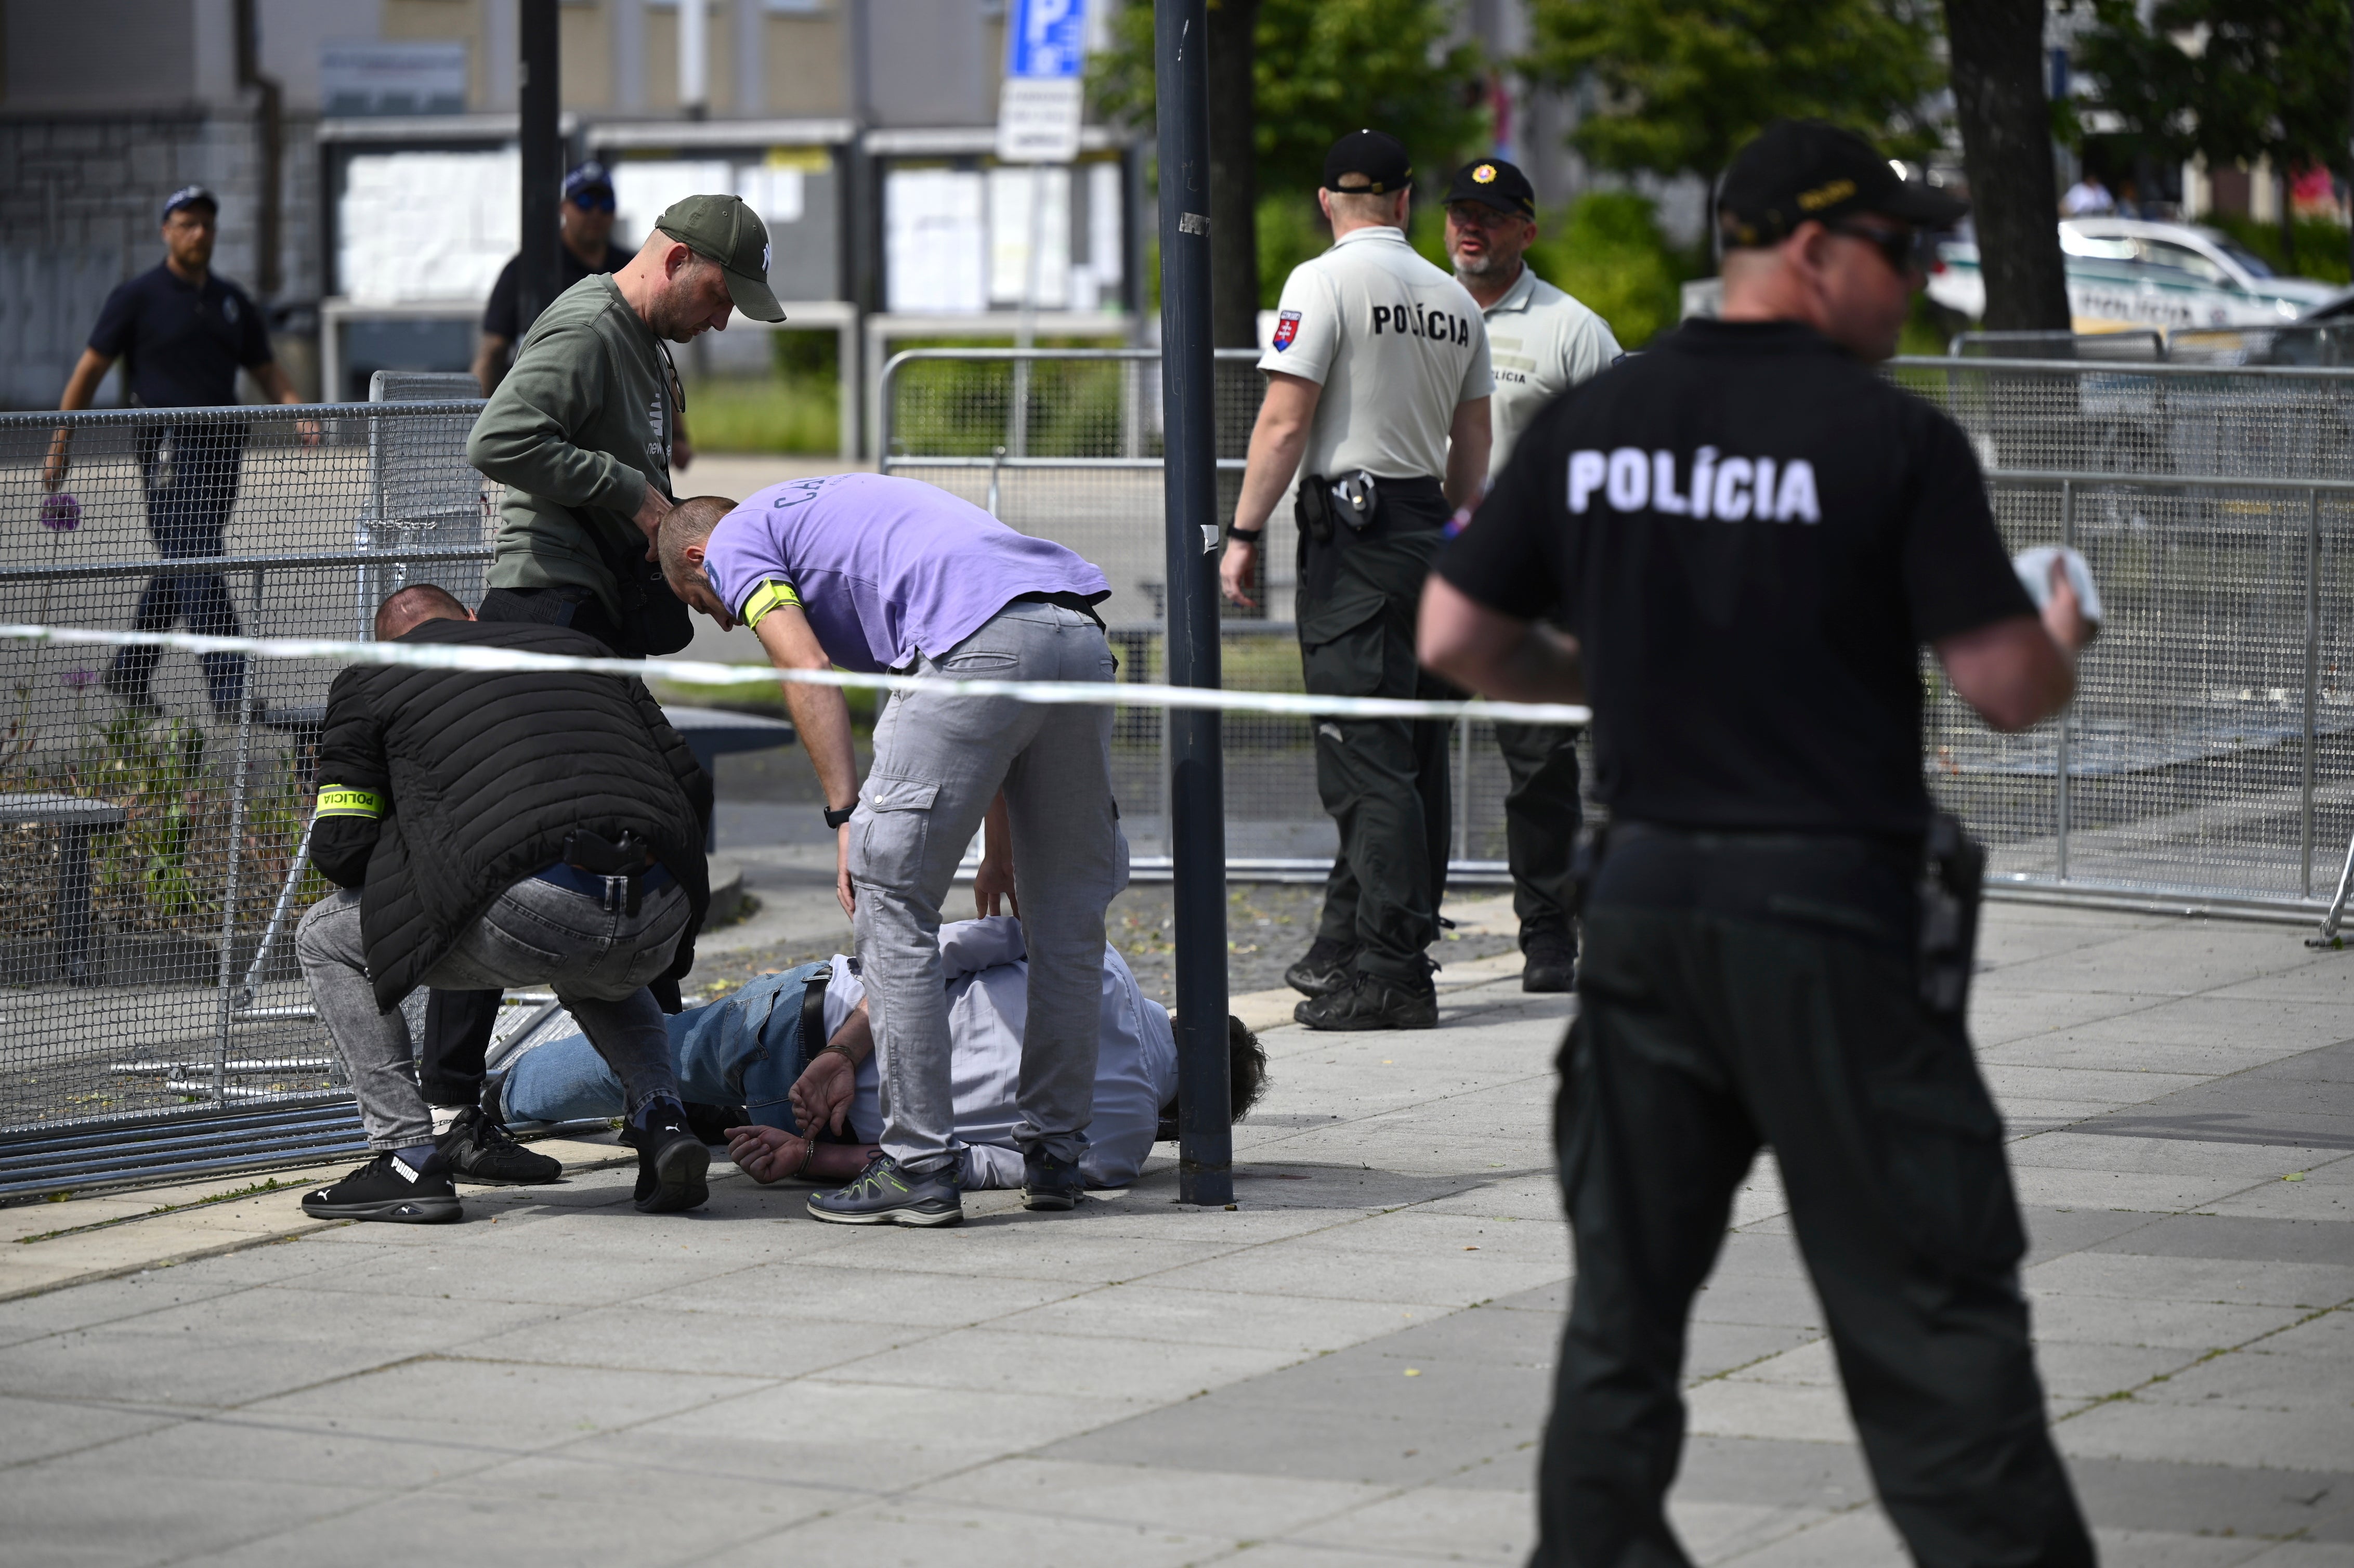 Slovakian prime minister Fico was shot in an attempted assassination on Wednesday